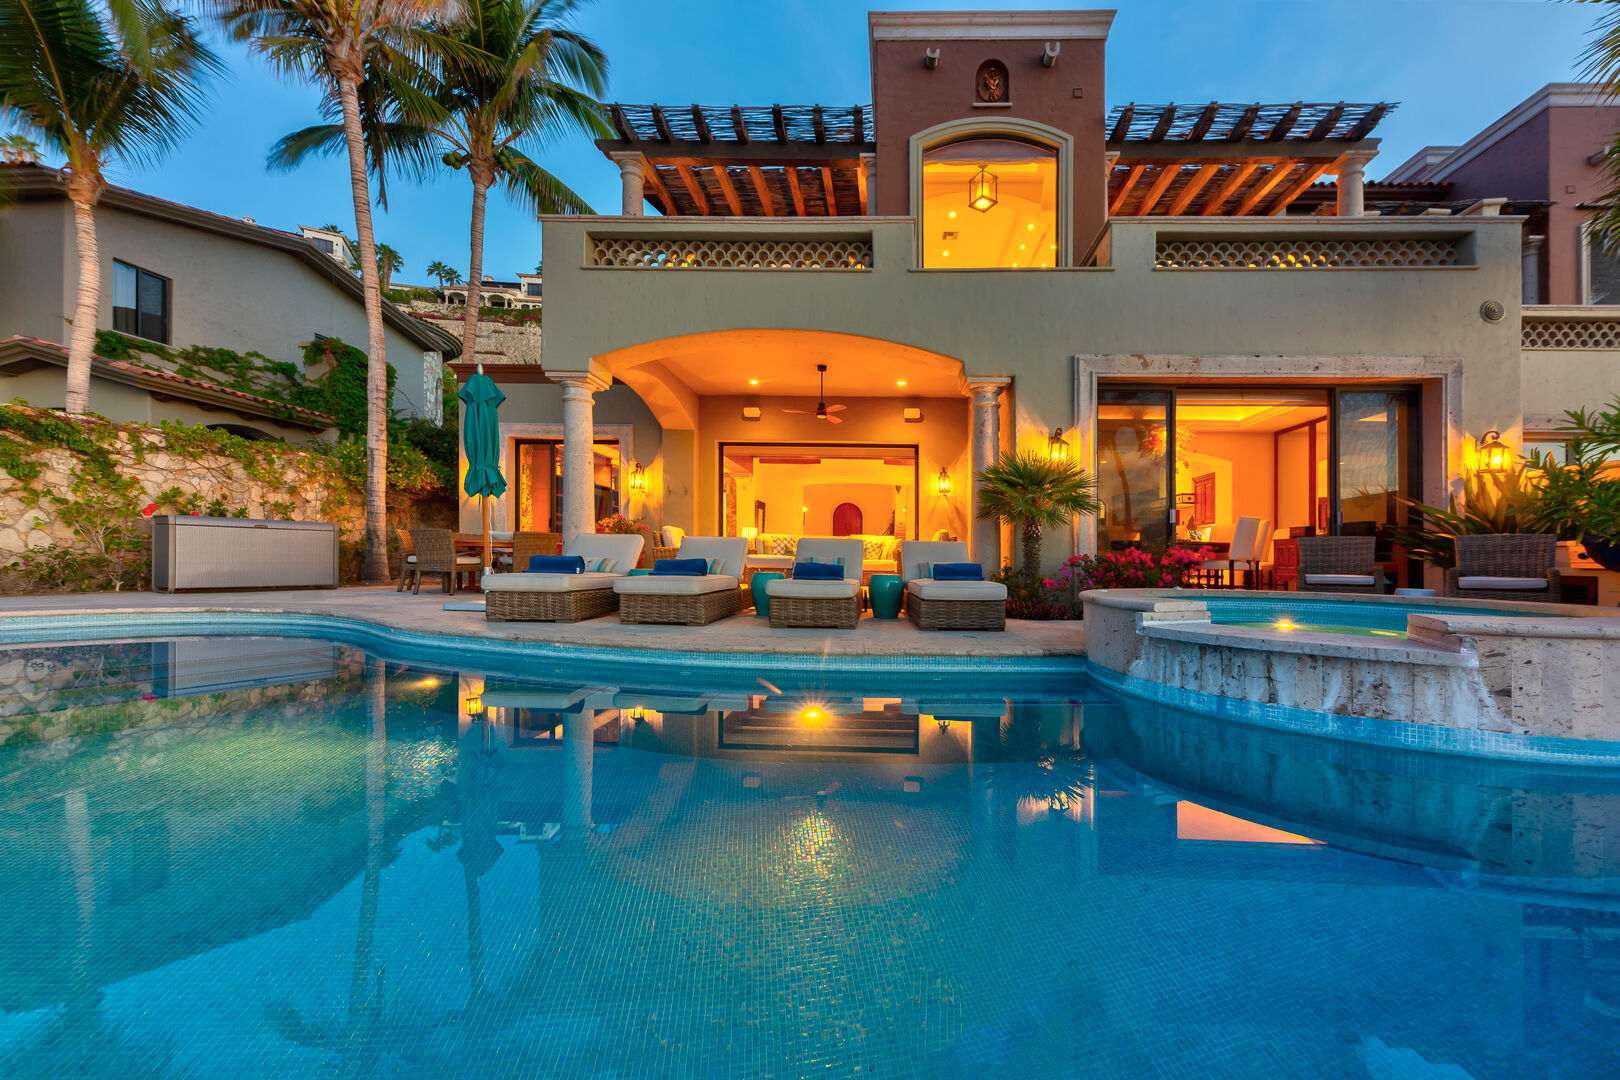 Pool and lounge area at our luxury villa in Los Cabos